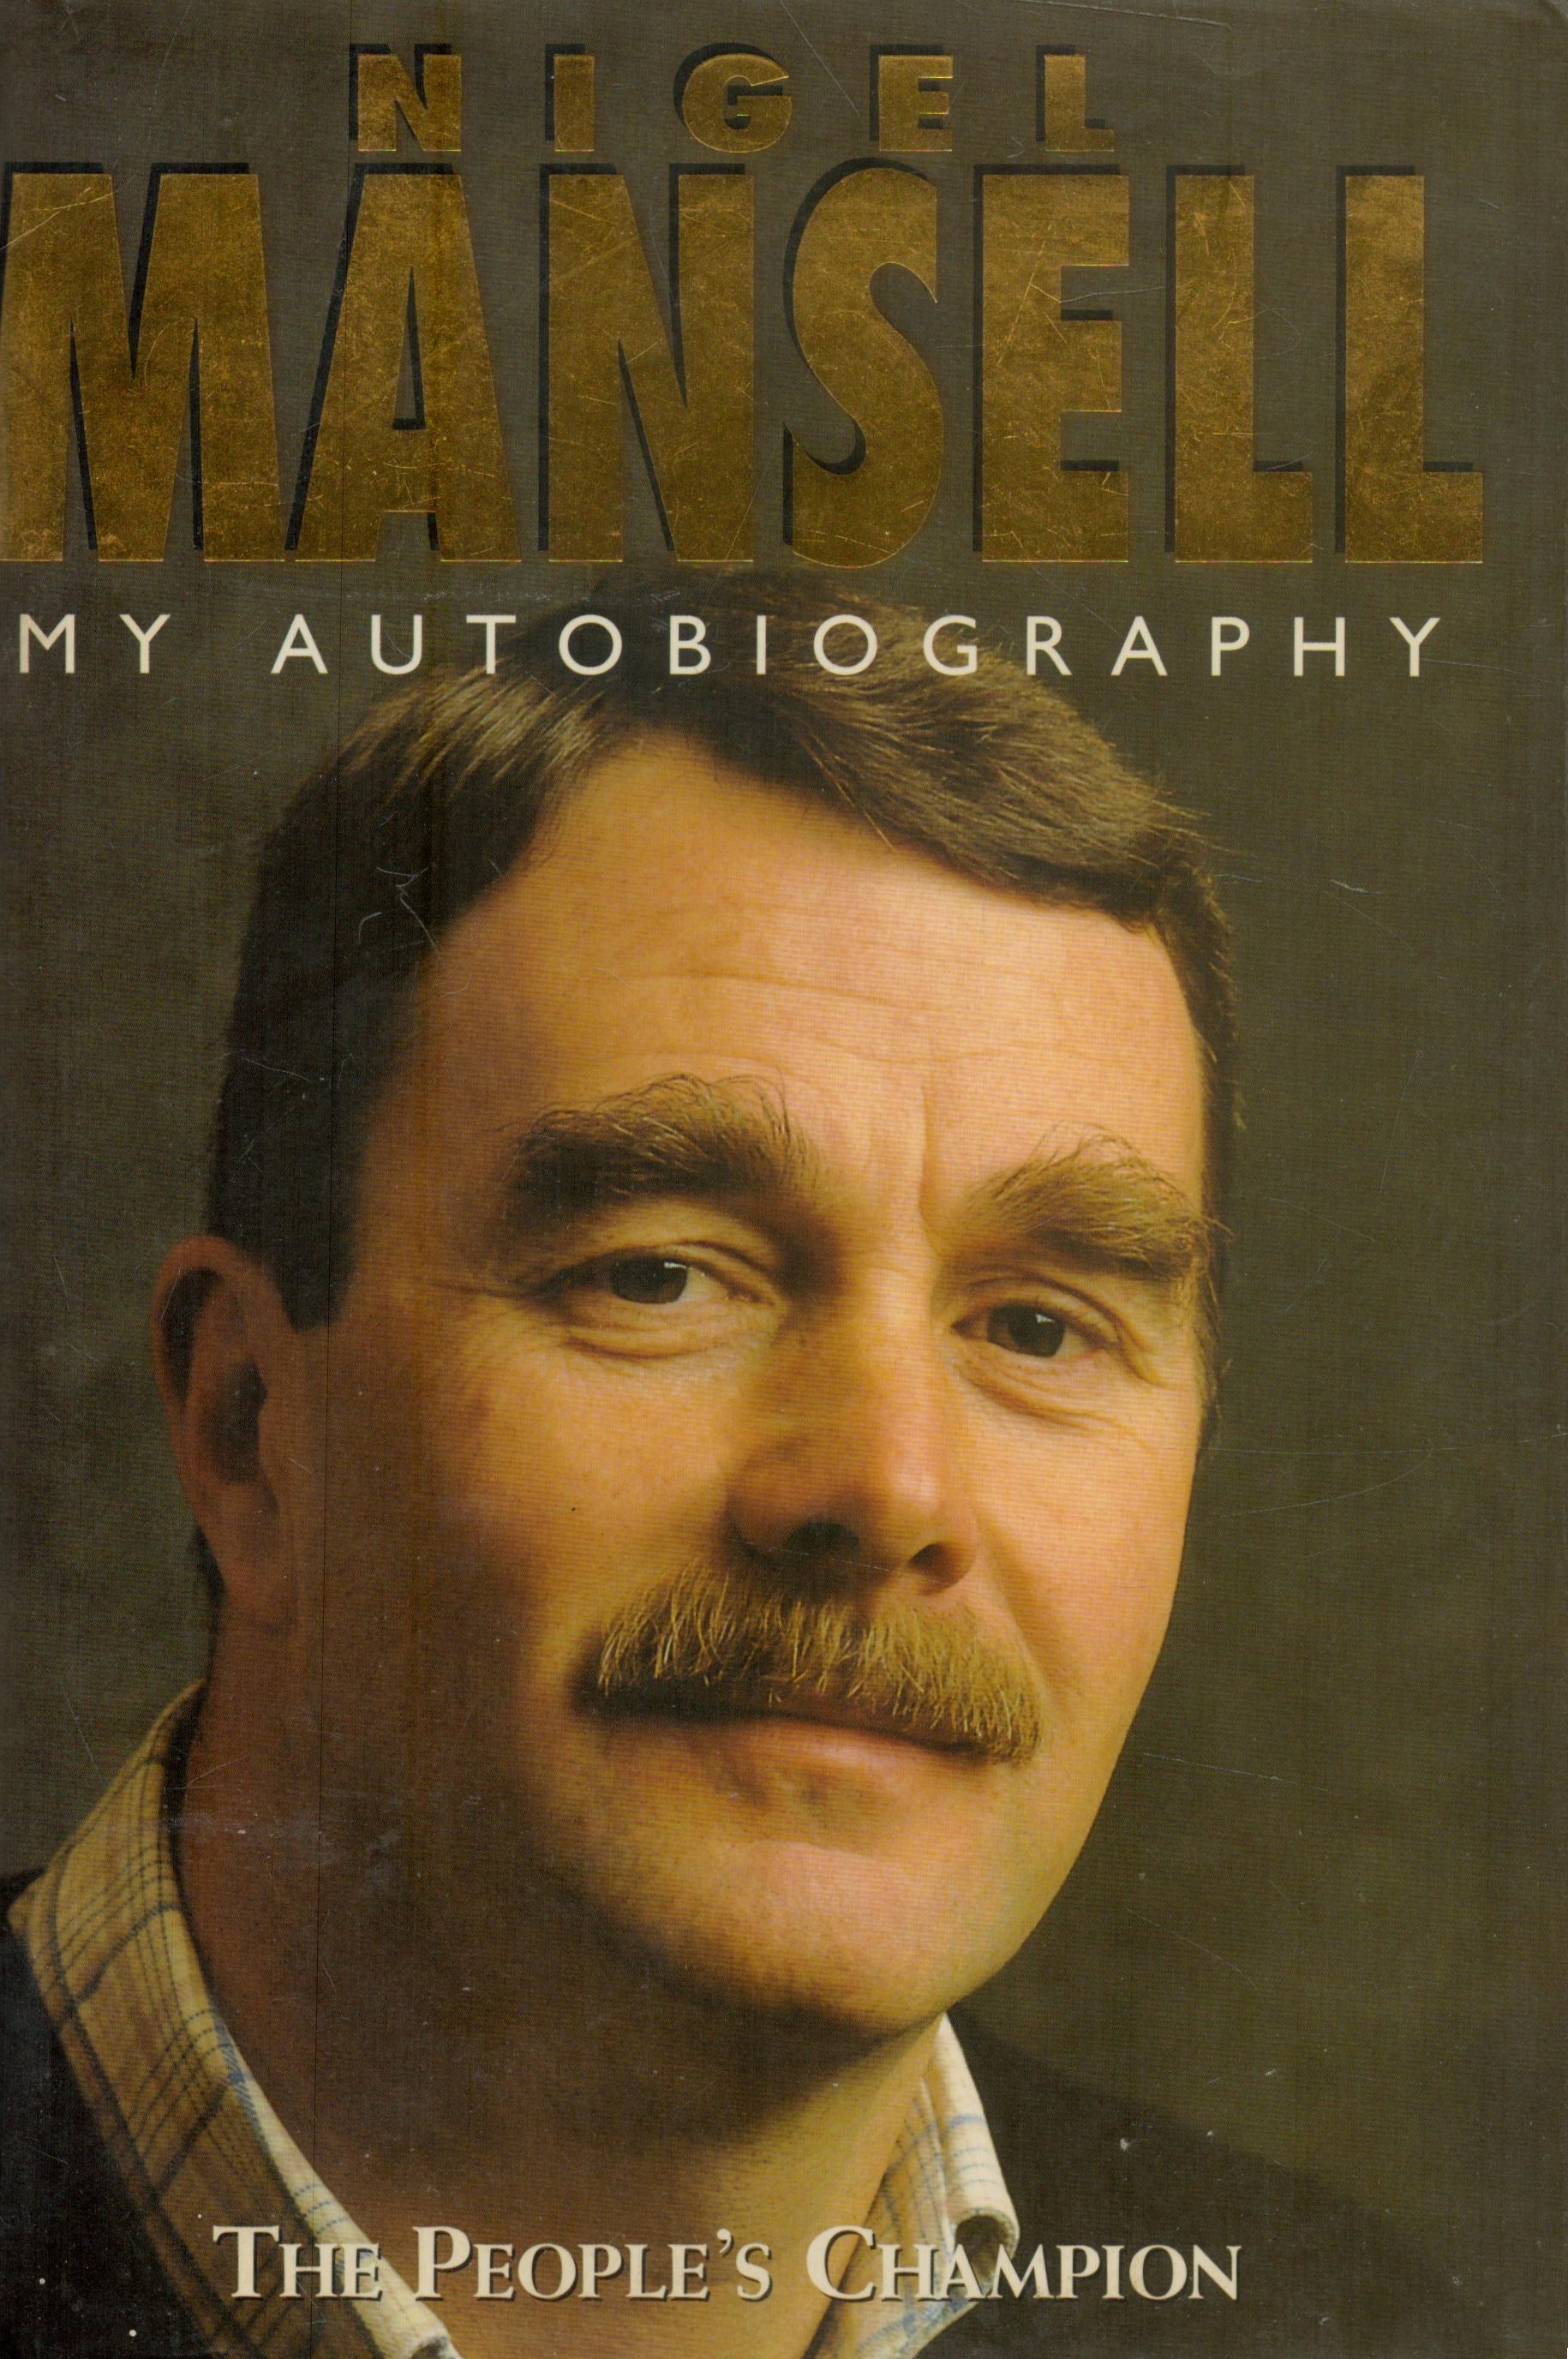 Nigel Mansell Signed Book - Nigel Mansell My Autobiography - The People's Champion by Nigel